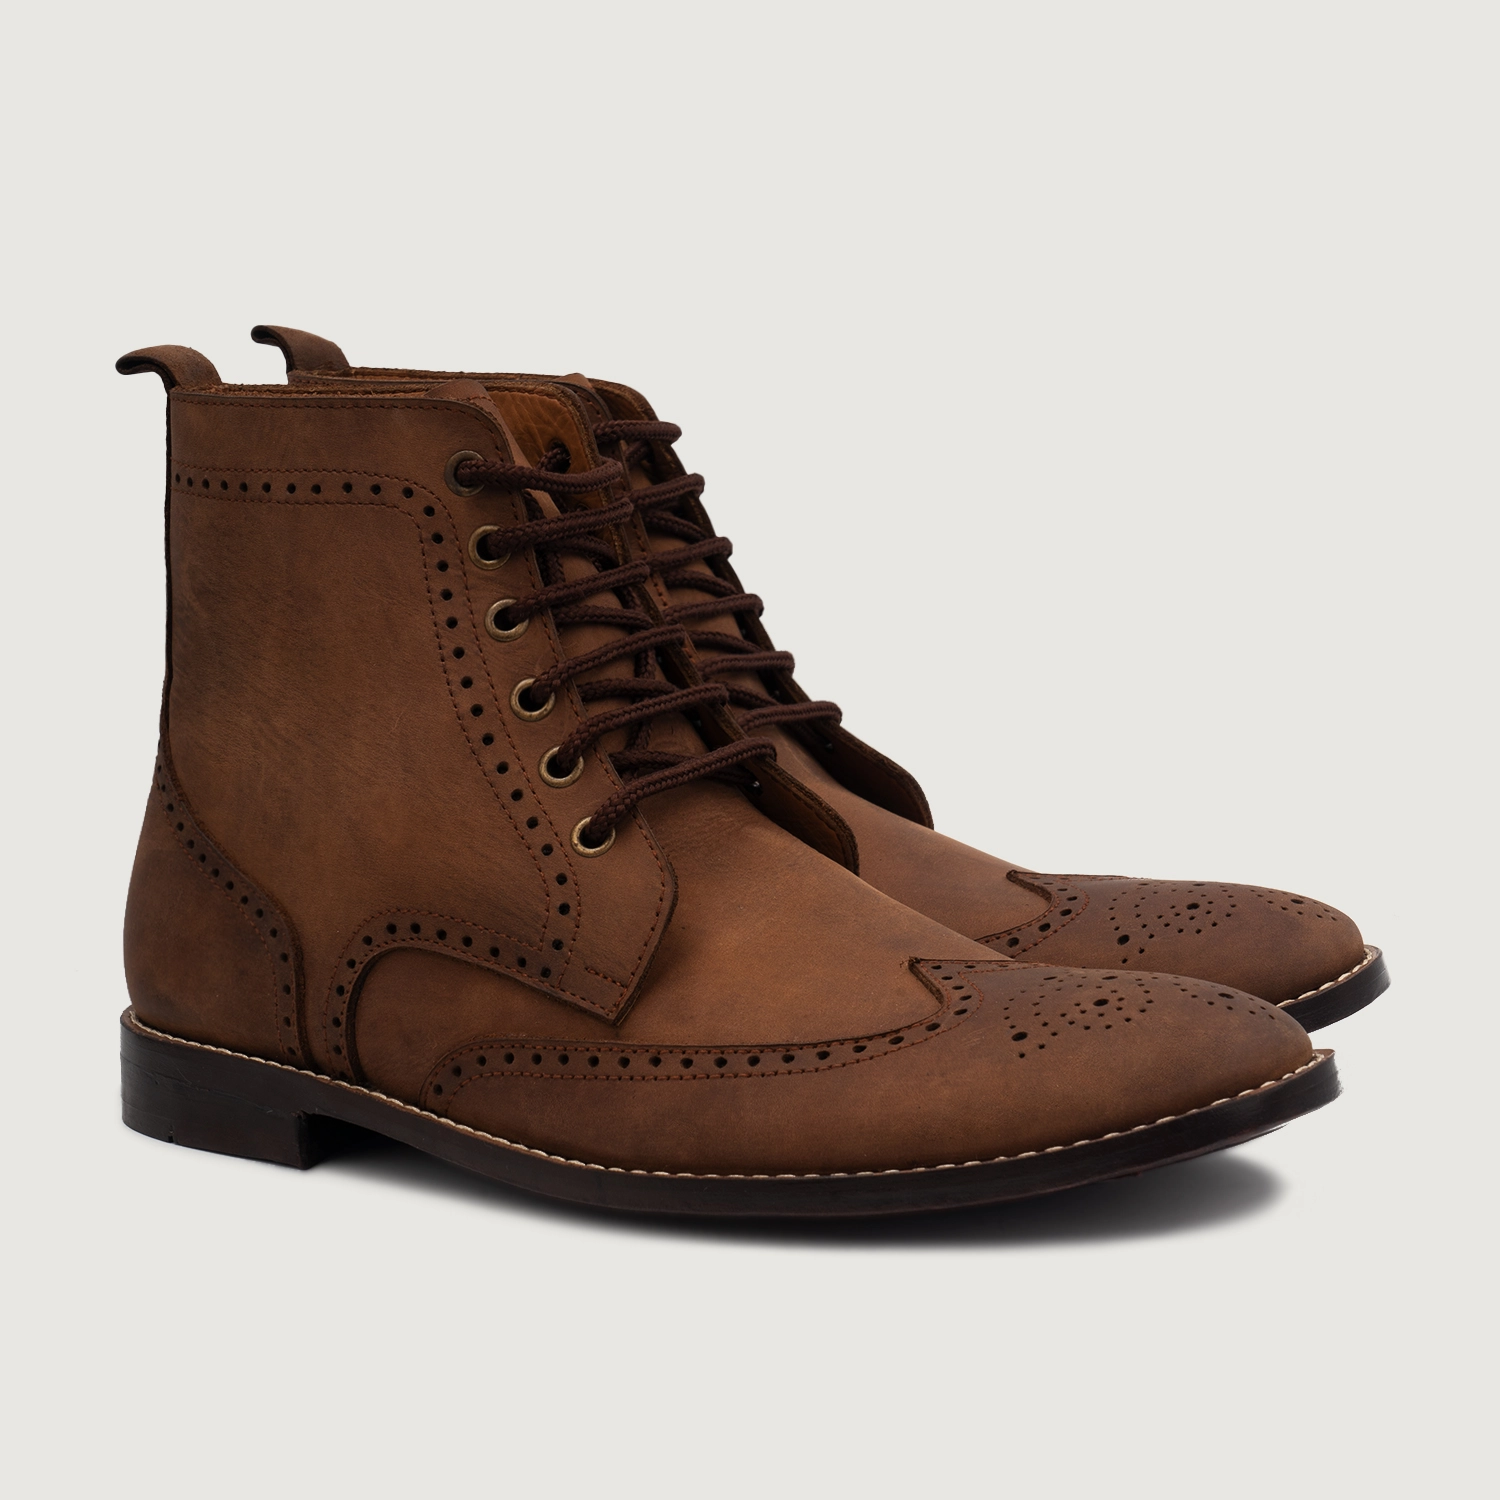 Men’s Leather Boots – Formal Edition